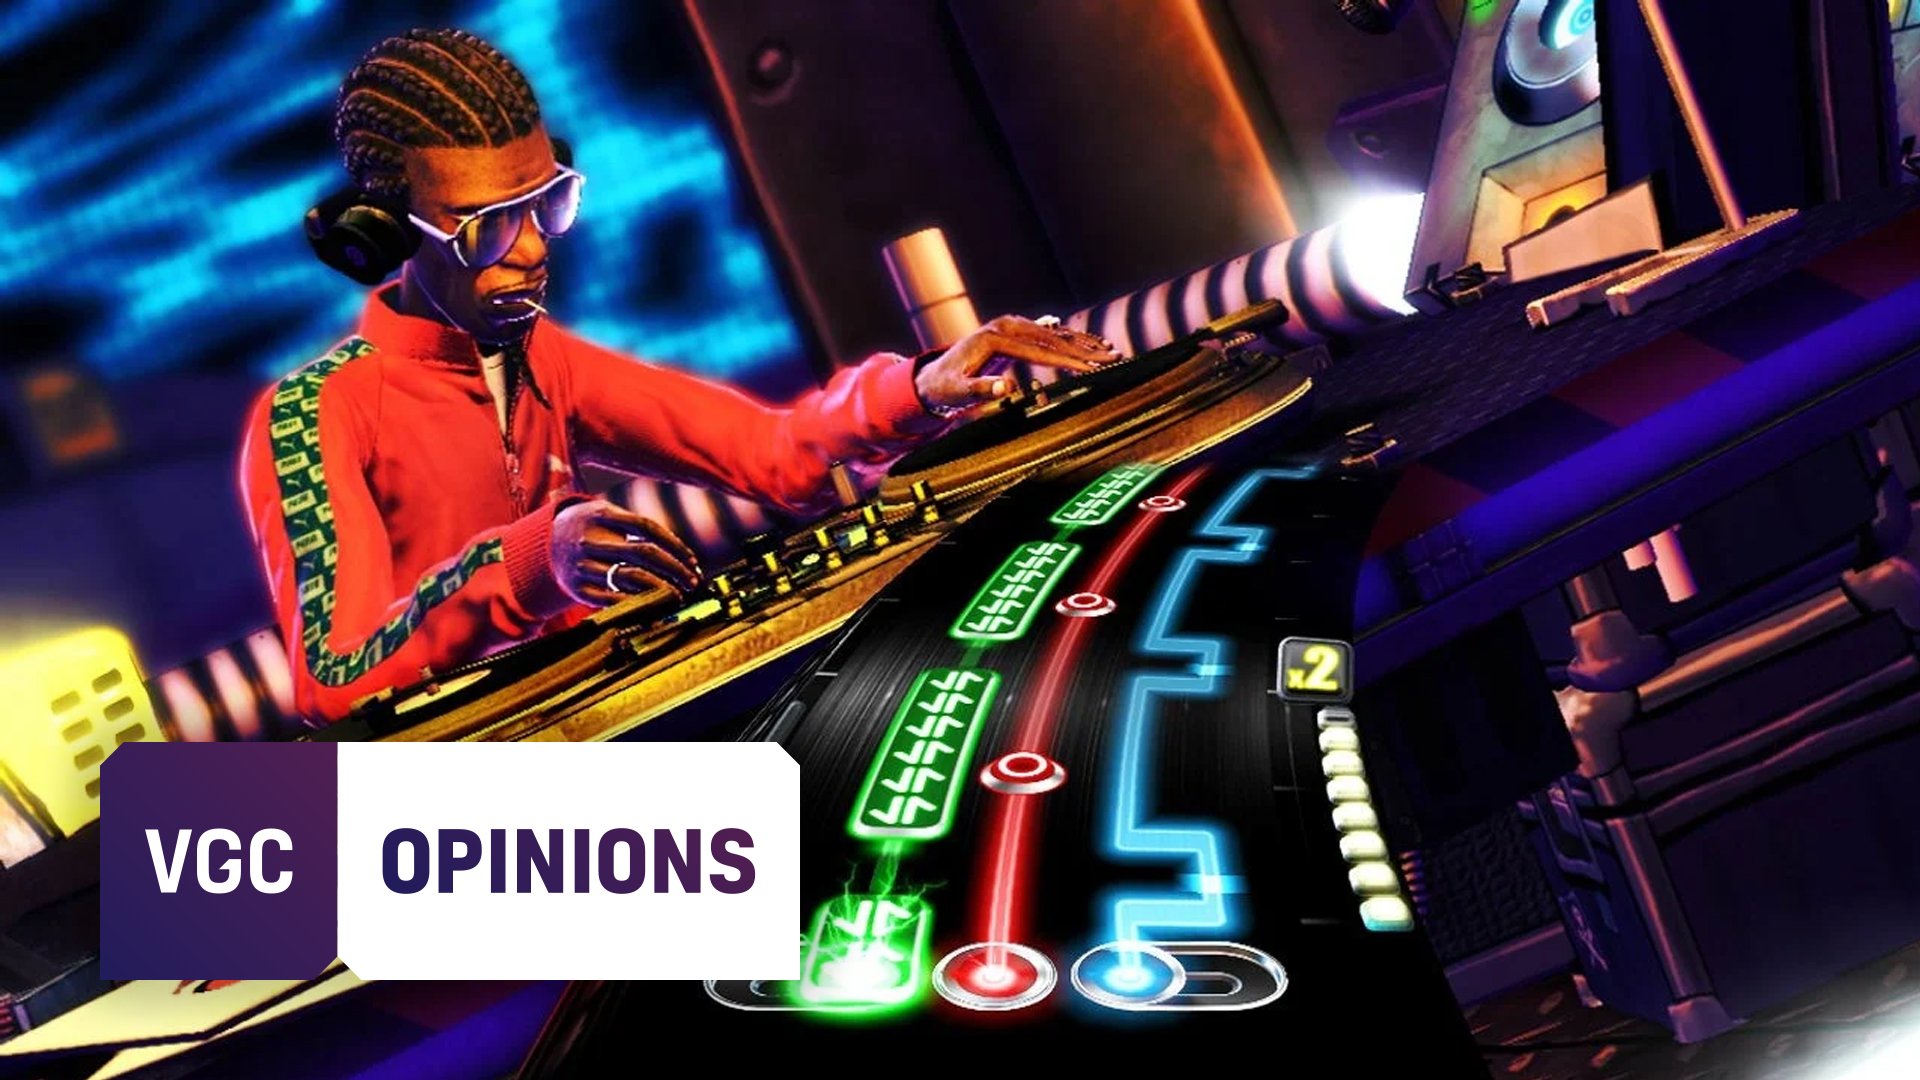 In the age of TikTok and Fortnite Festival, it’s time for DJ Hero 3